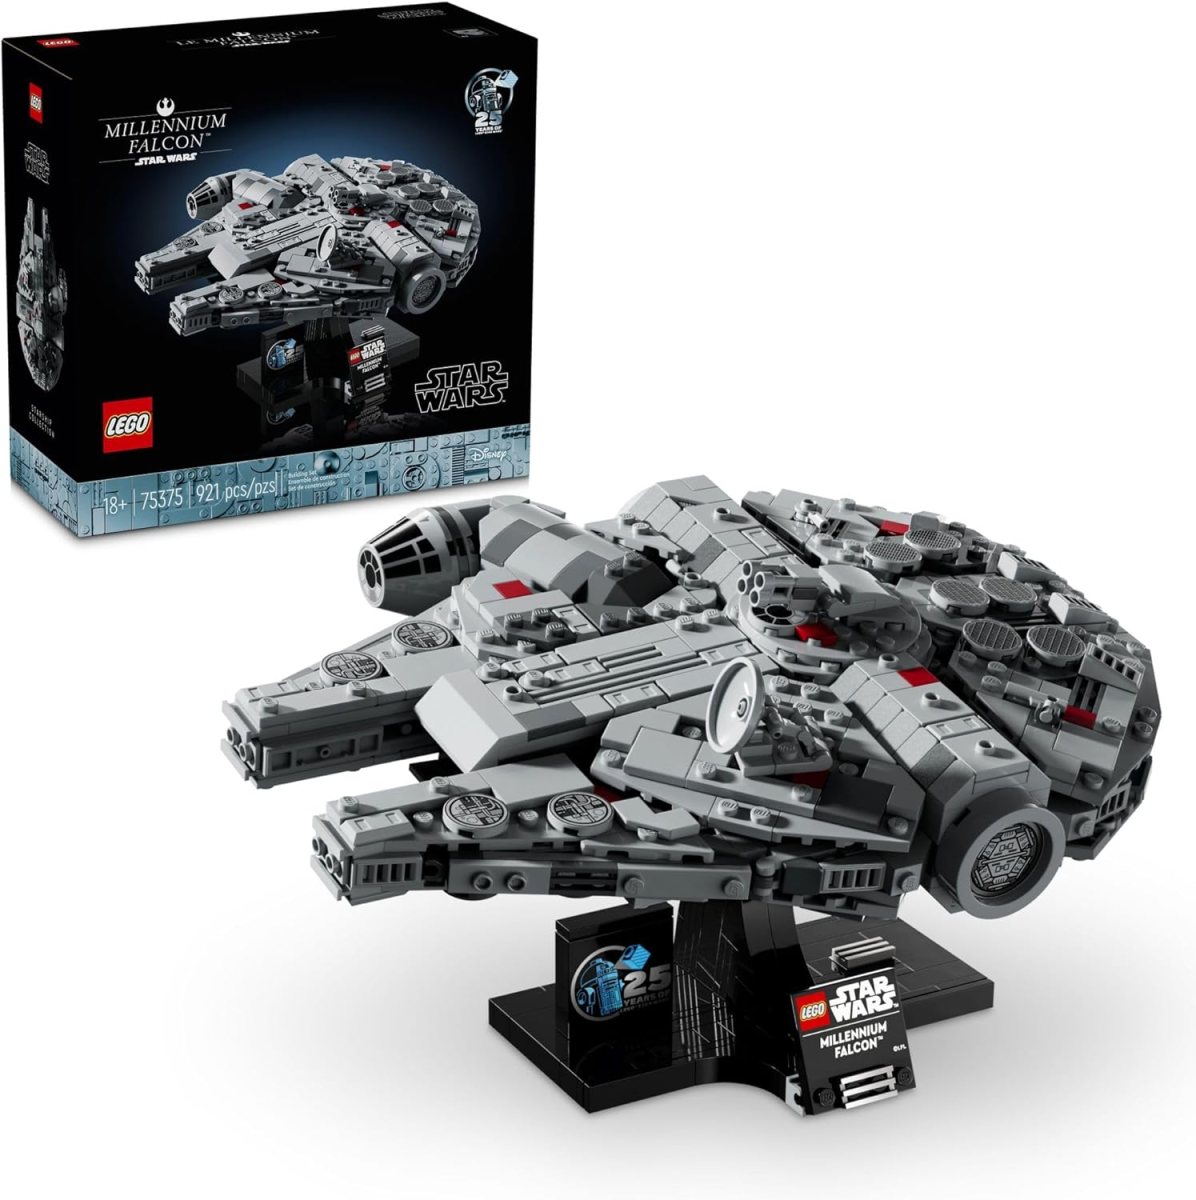 The 25th anniversar set of the A New Hope's Millennium Falcon made of LEGO